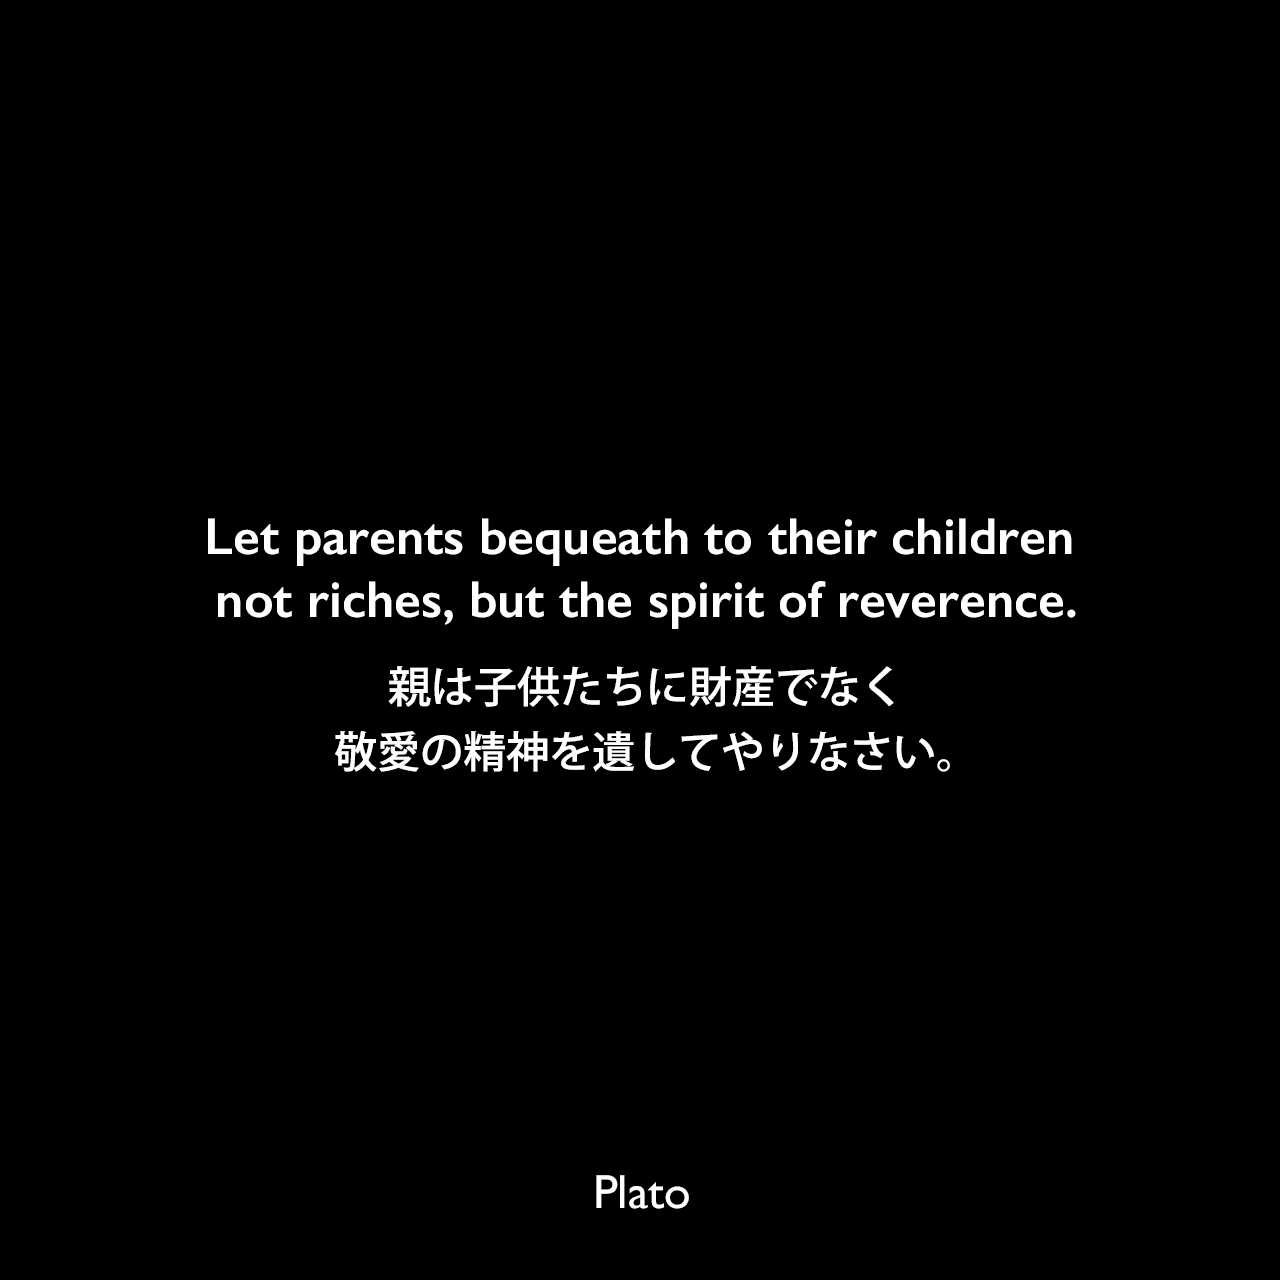 Let parents bequeath to their children not riches, but the spirit of reverence.親は子供たちに財産でなく敬愛の精神を遺してやりなさい。Plato